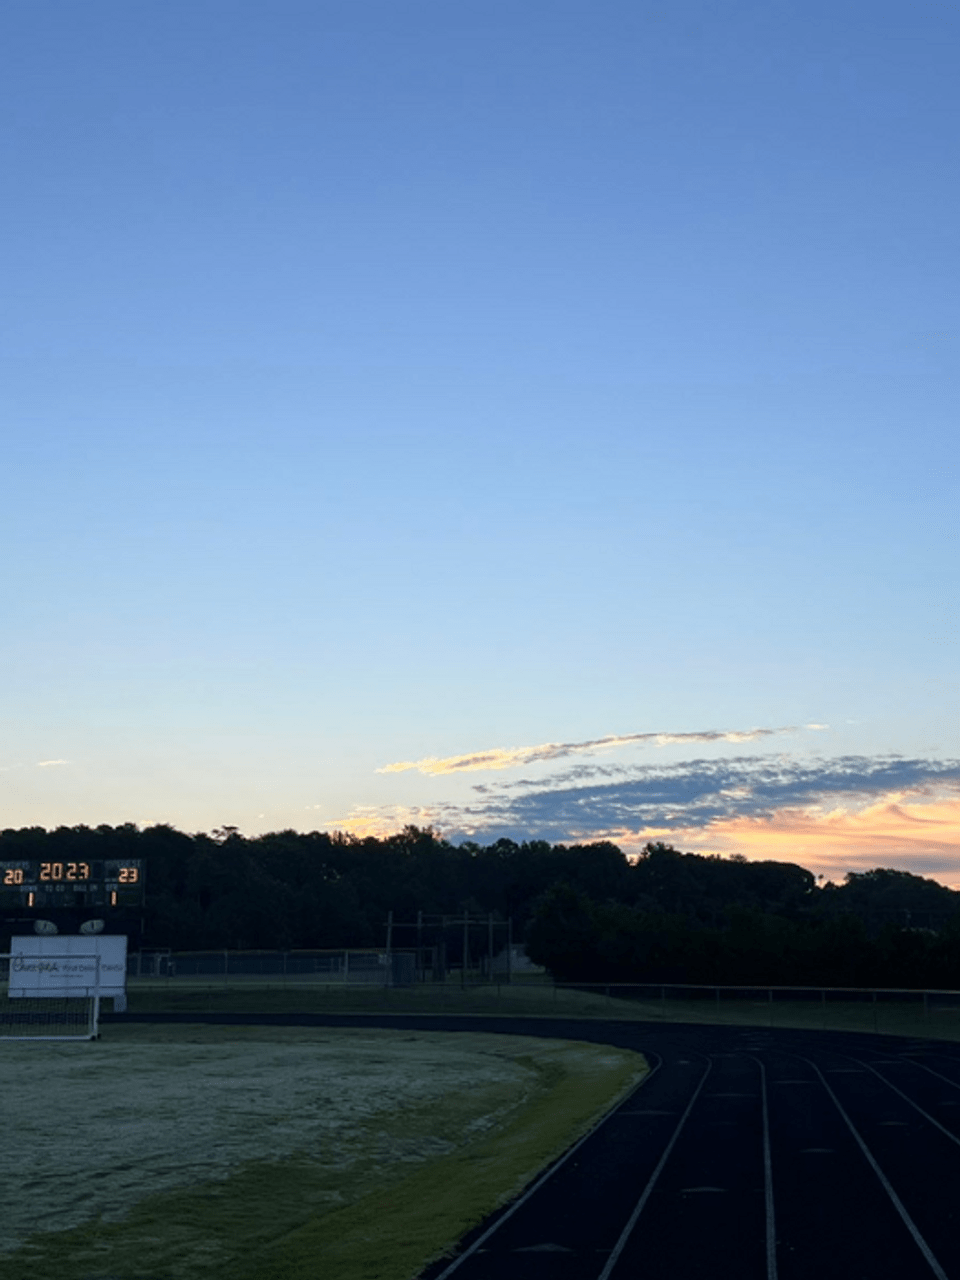 A sports field with a scoreboard and running track at sunset. - School